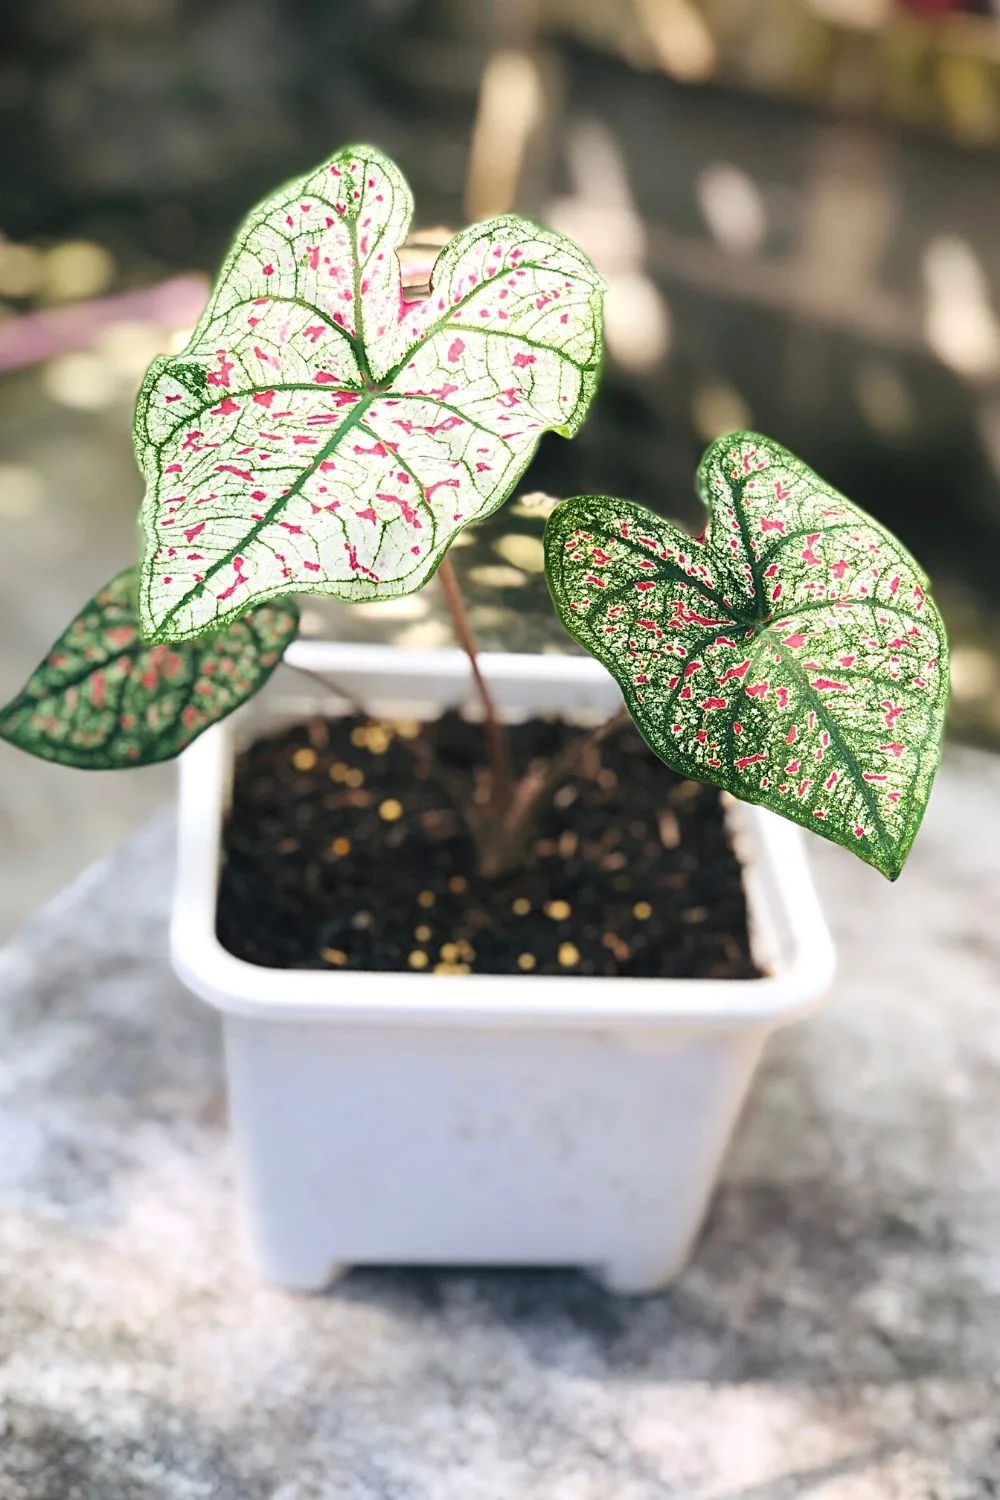 Caladium is another gorgeous plant that you can grow in water and use as decor